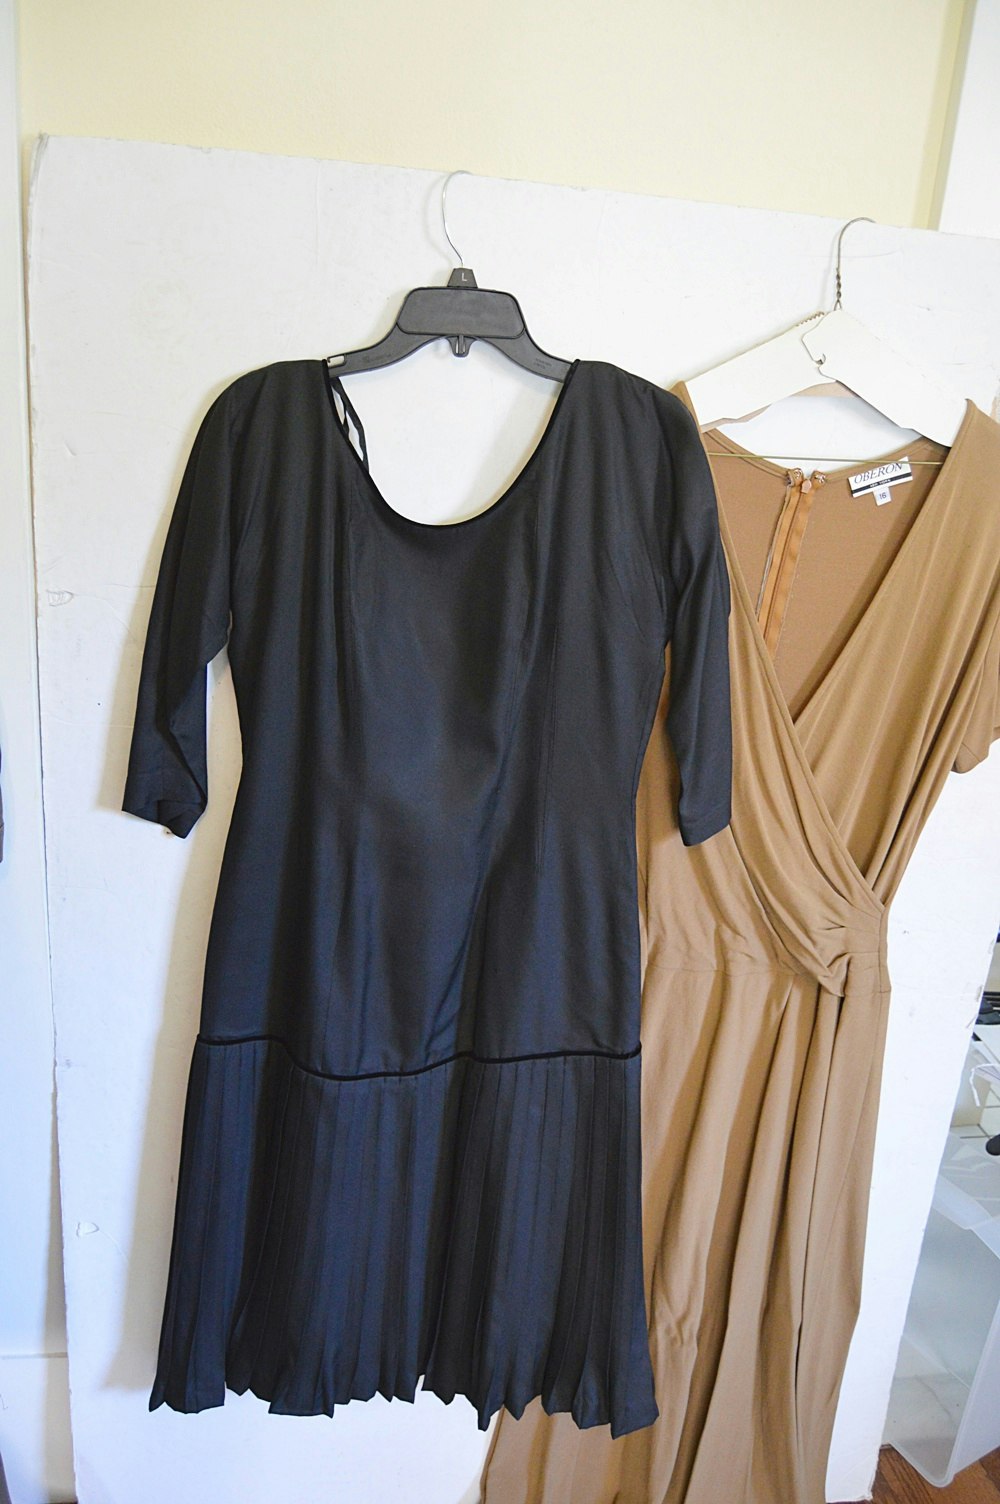 Women's Vintage Clothing with Saks Fifth Avenue Dress | EBTH